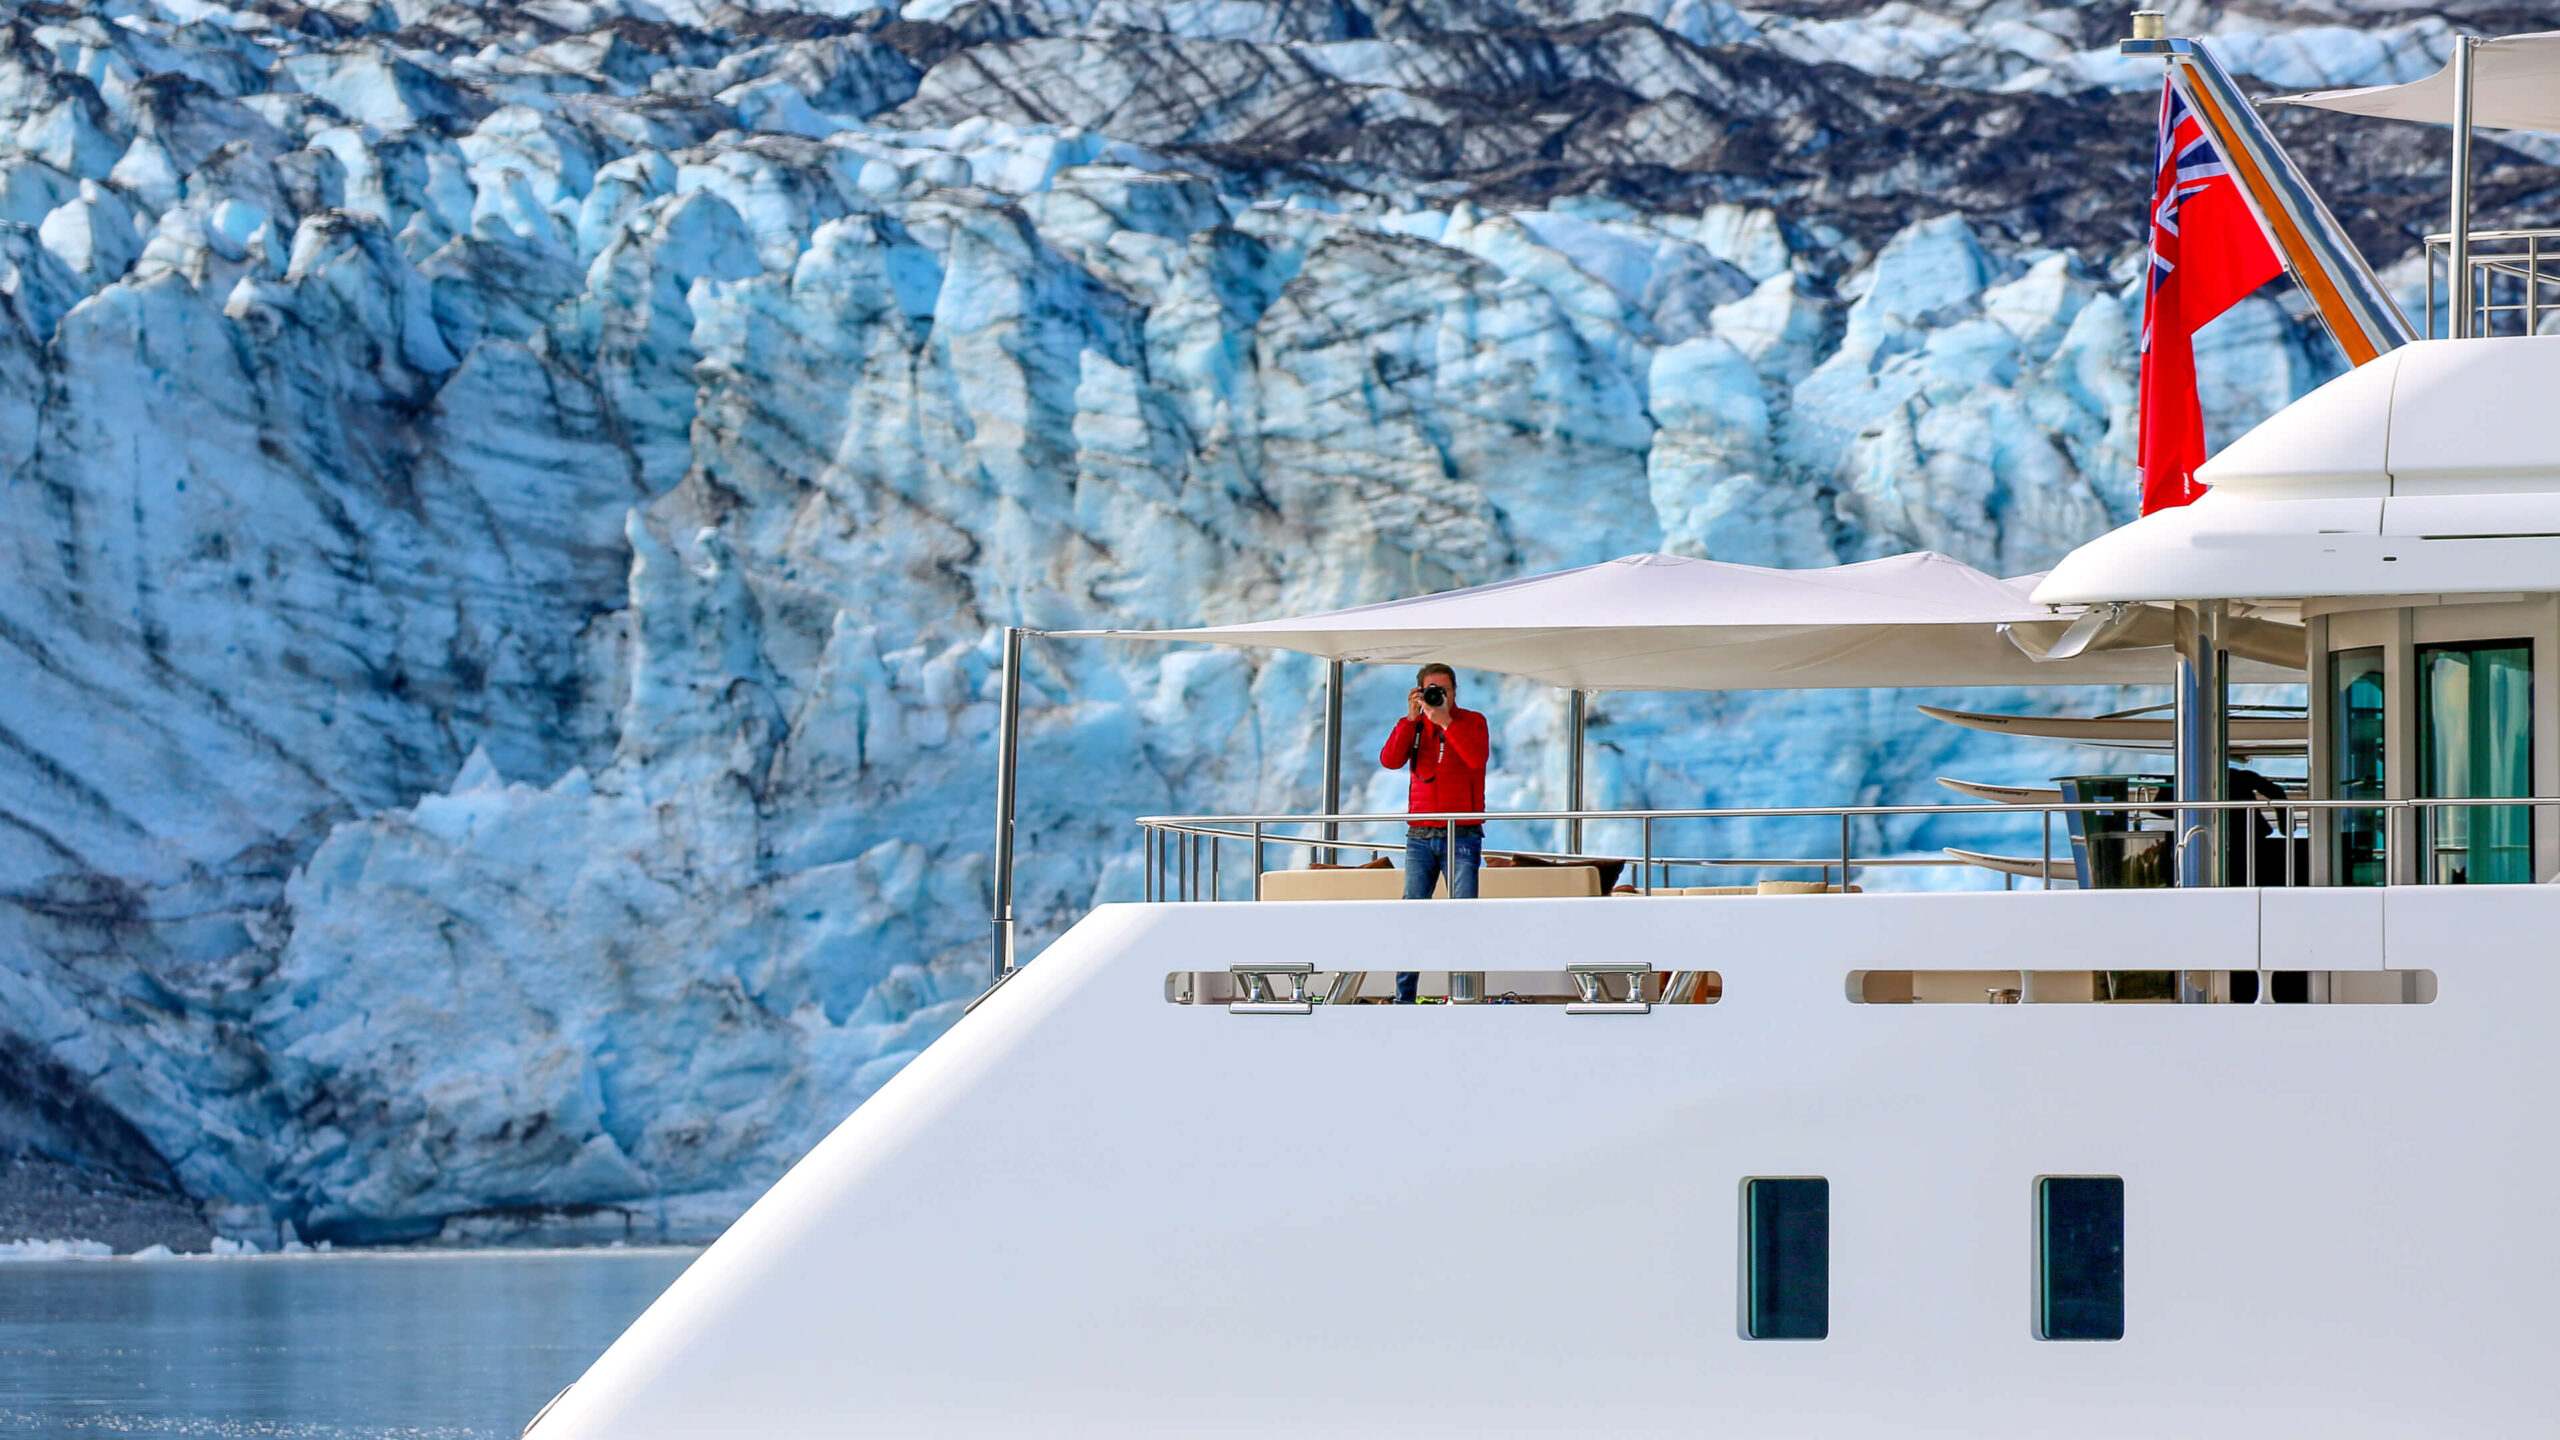 man on a boat, white boat, scenic background